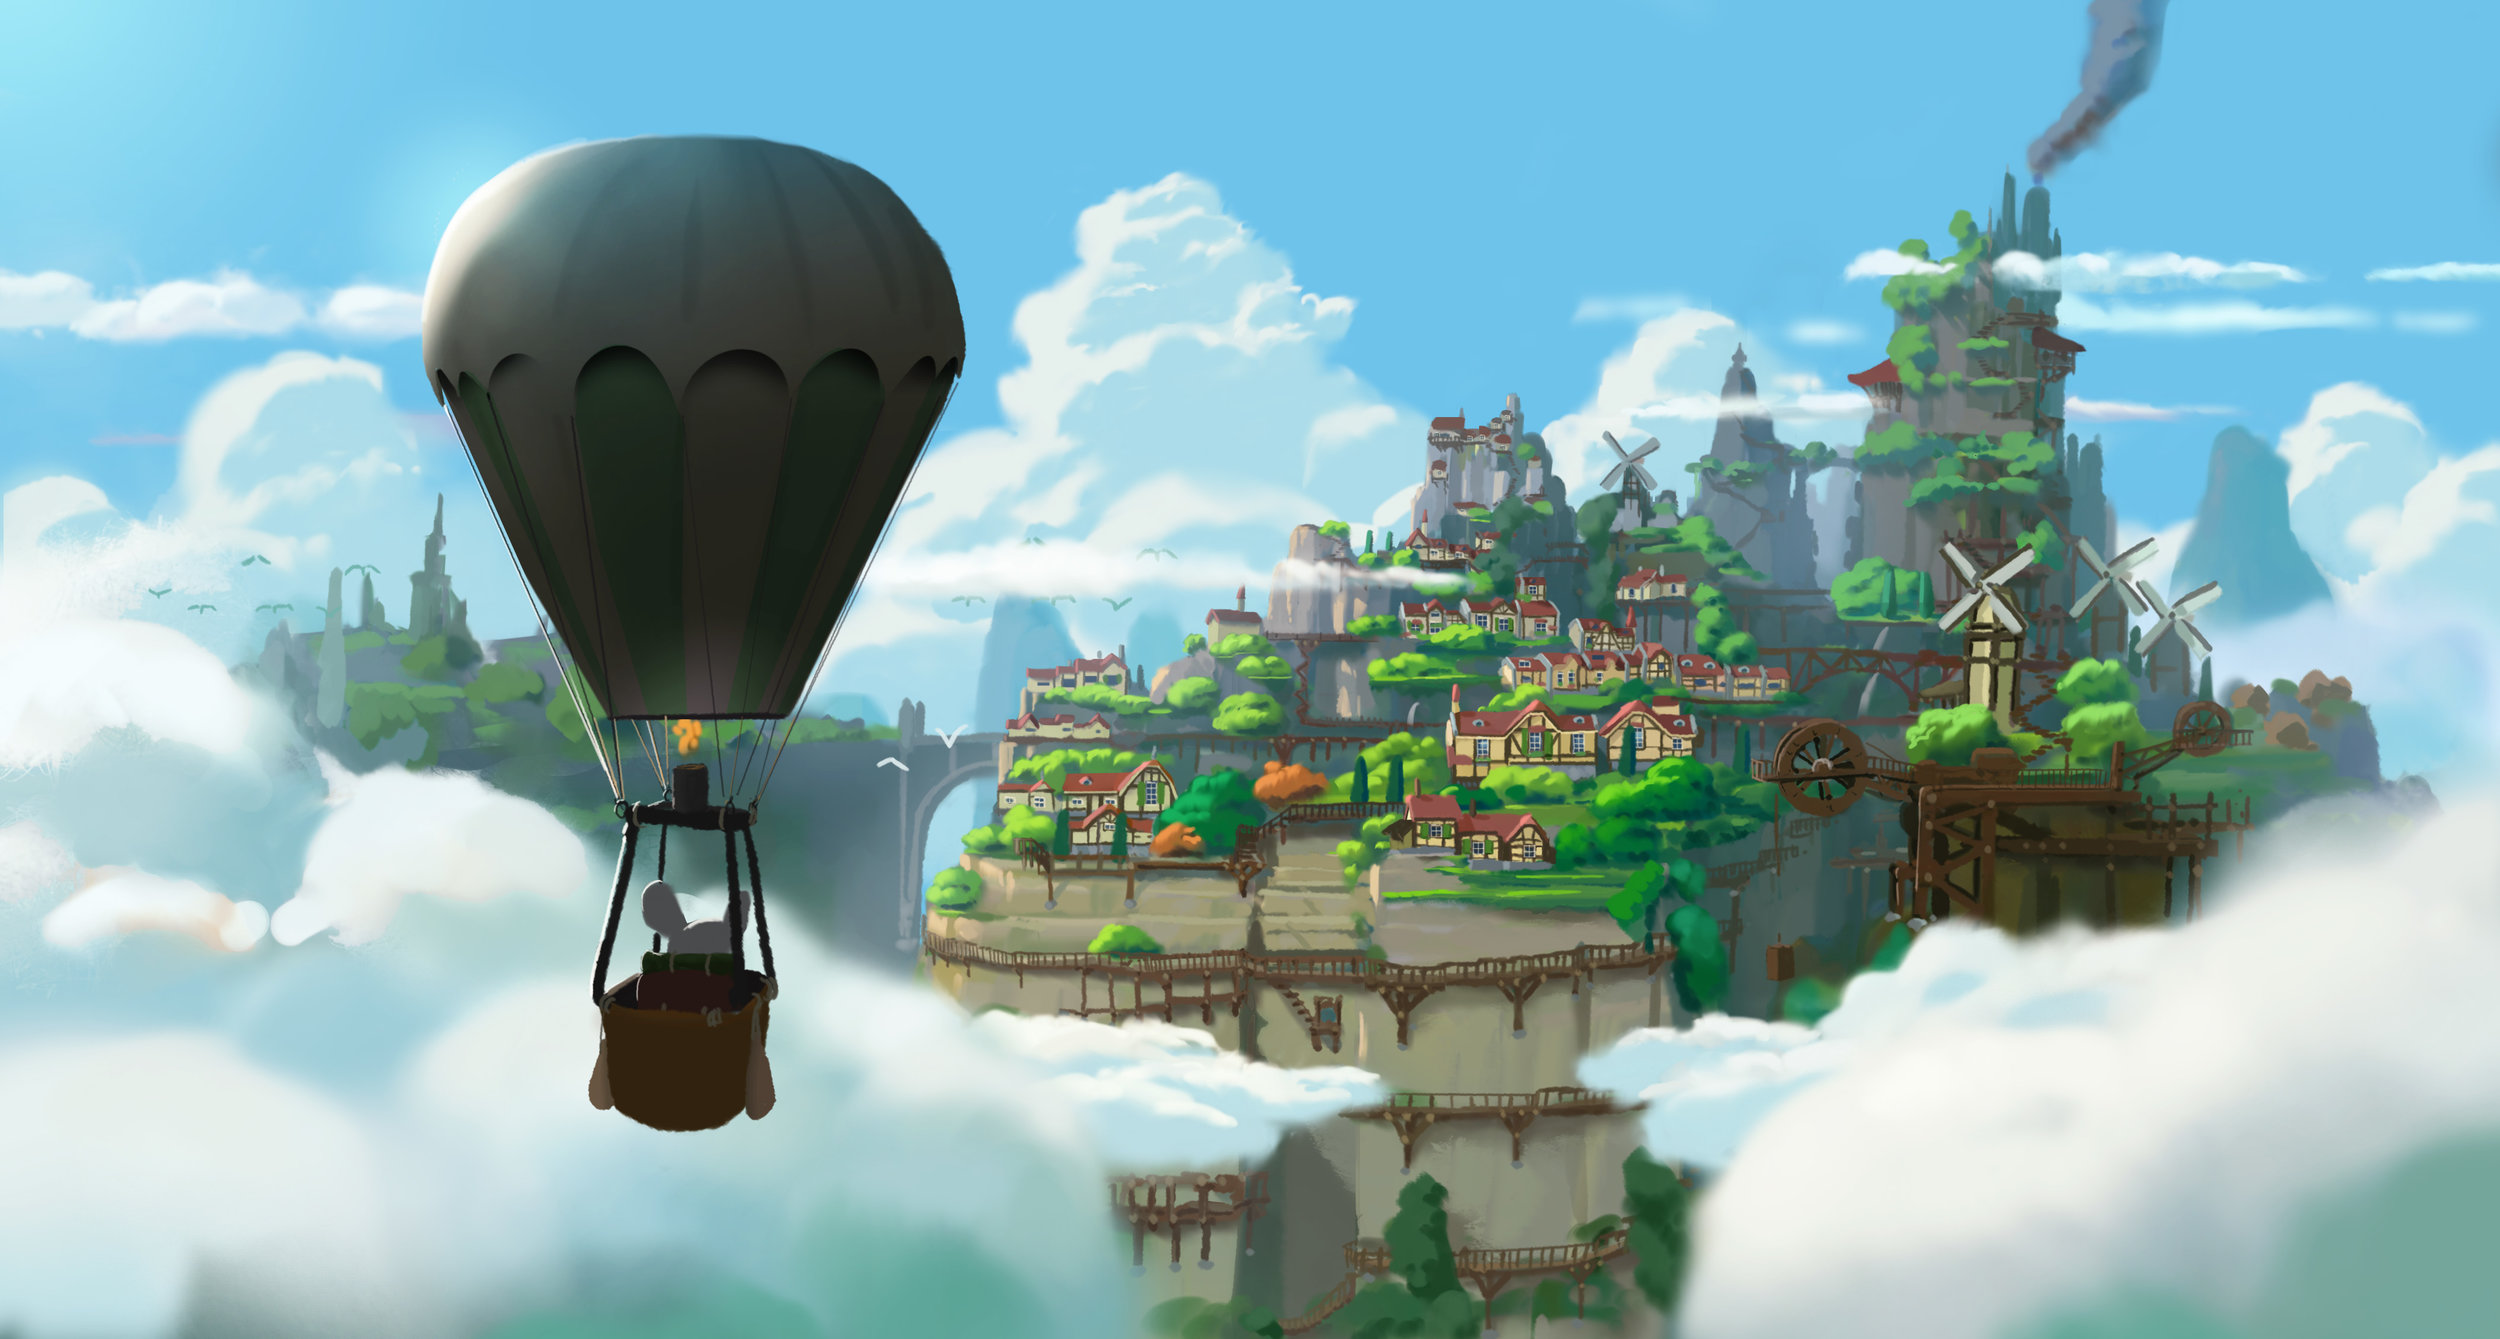 General 2500x1339 Ryo Yambe rodent trees hot air balloons clouds windmill house chimneys mice Anthro digital art